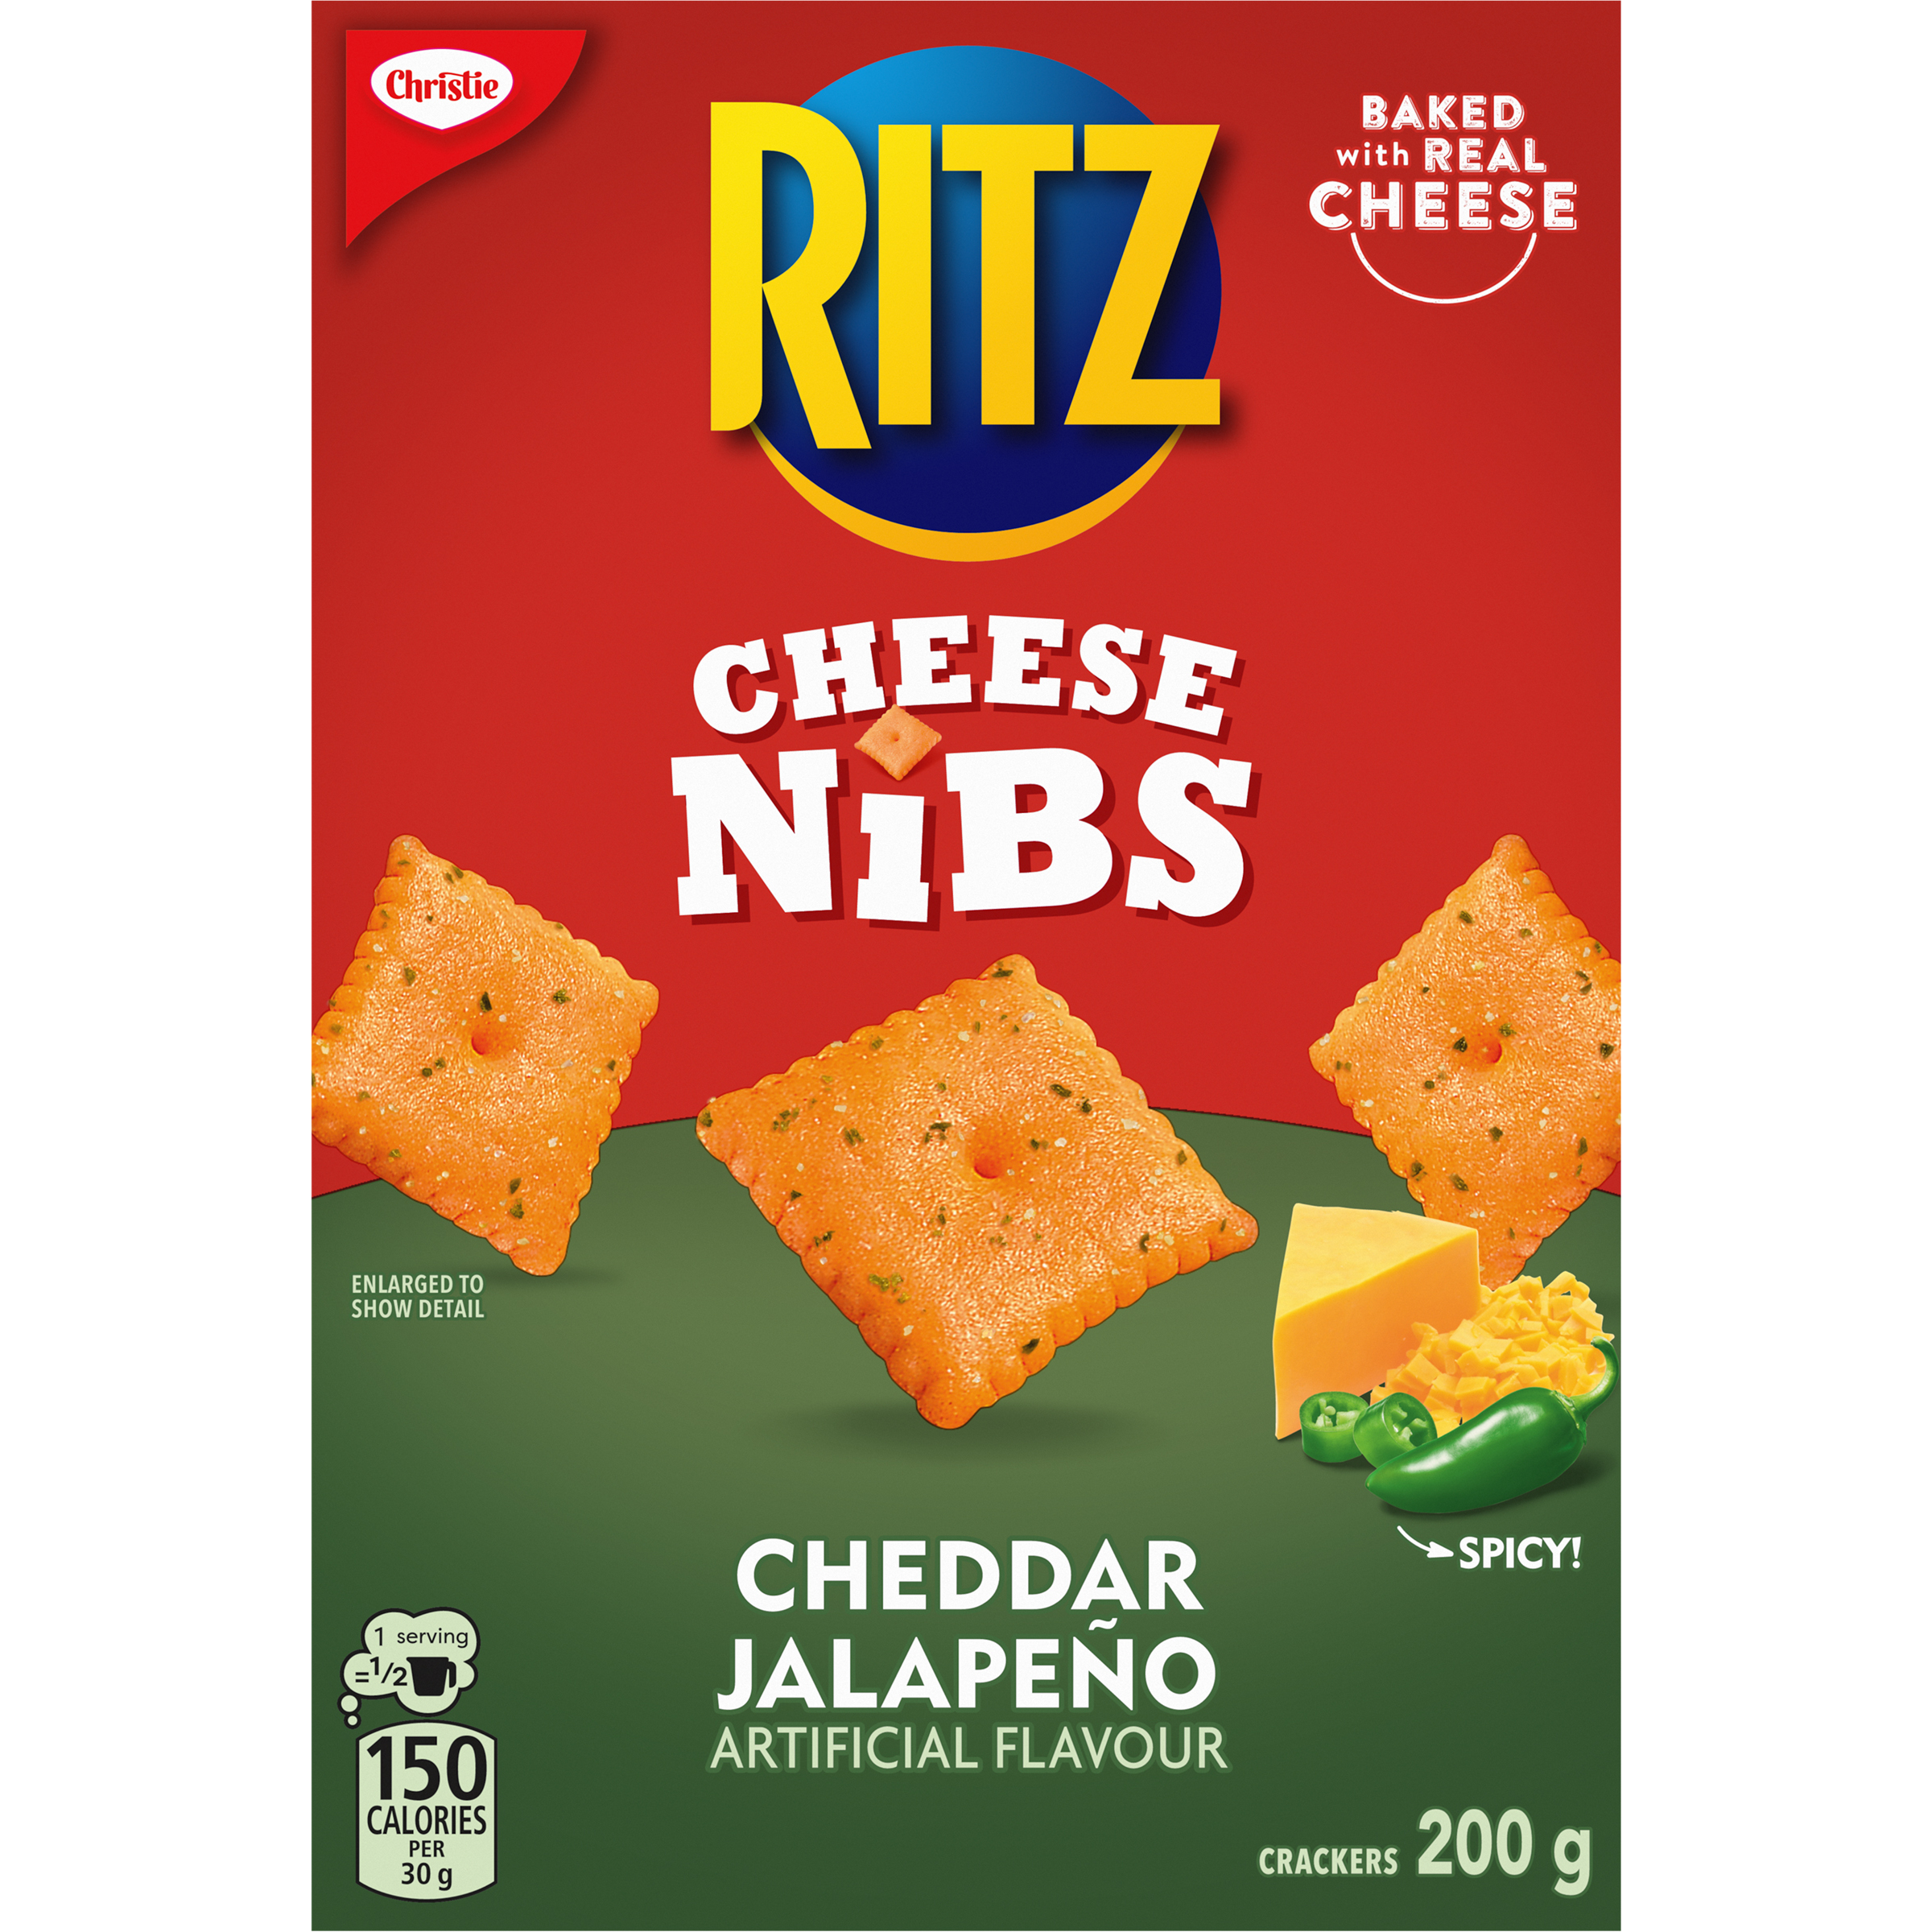 CHRISTIE RITZ CHEESE NIBS CHEDDAR JALAPENO 200G -2